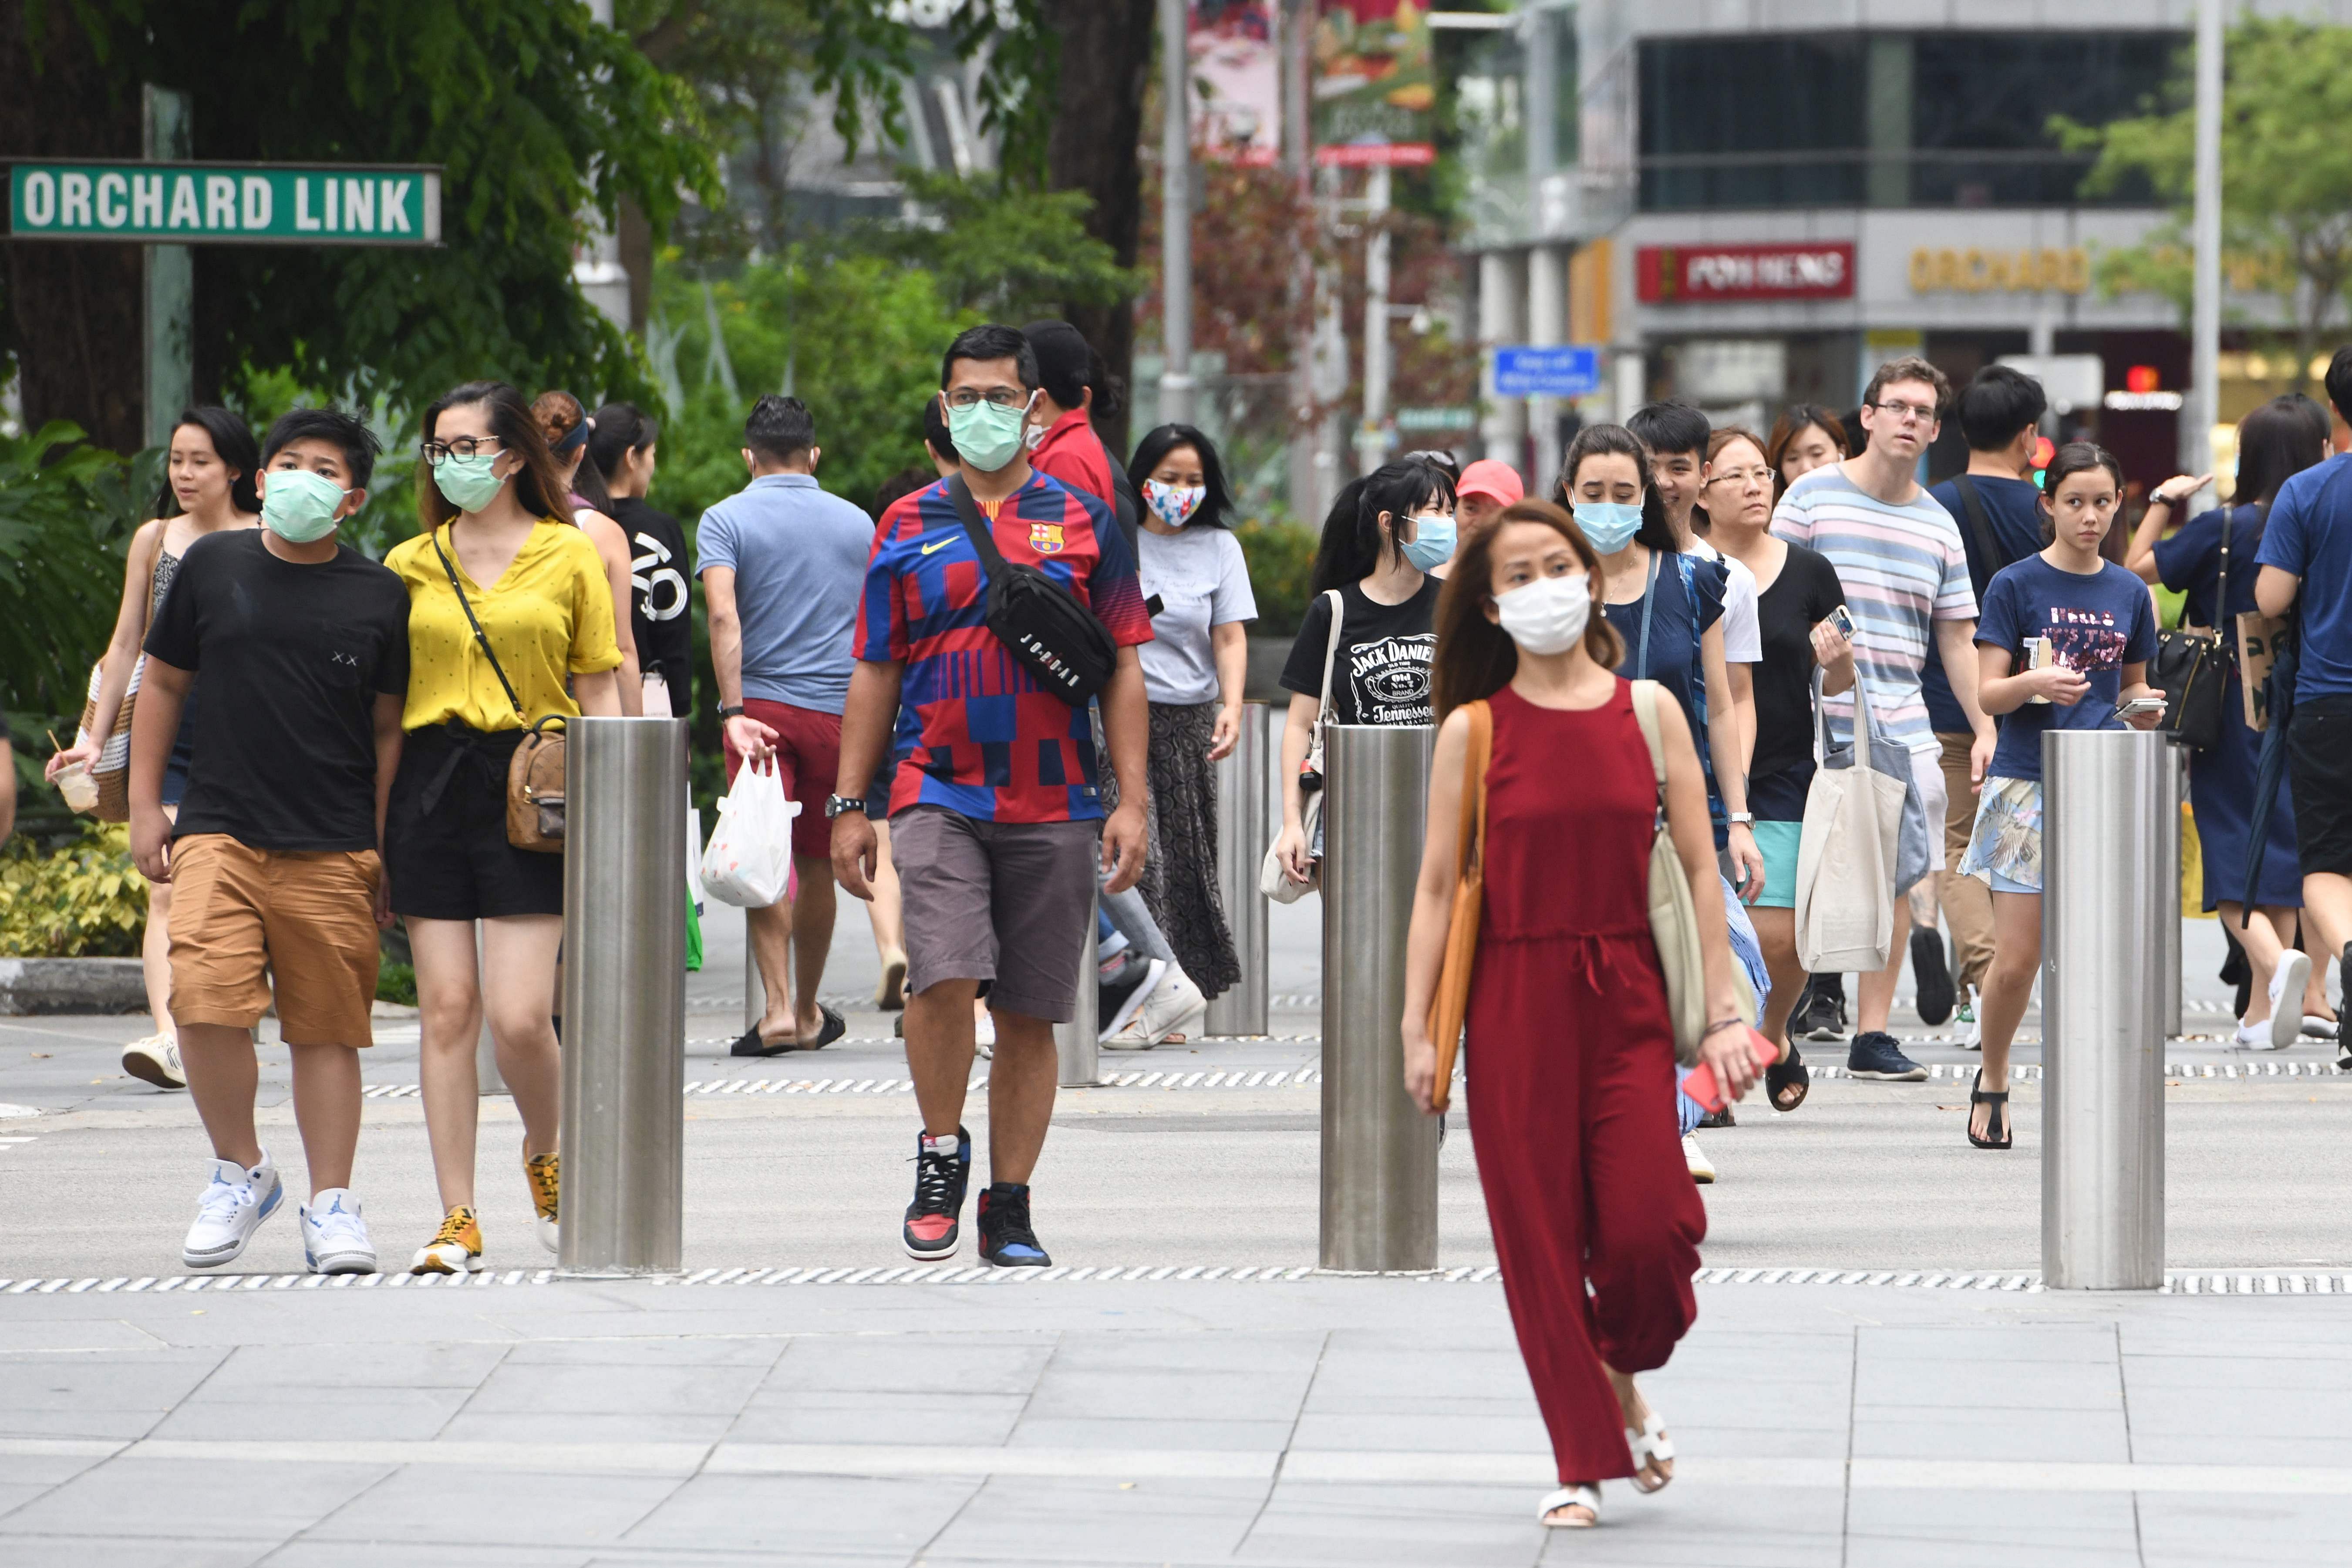 People wear facemasks to try to halt the spread of the COVID-19 coronavirus as they walk through a shopping district on Orchard Road in Singapore. (Credit: AFP Photo)